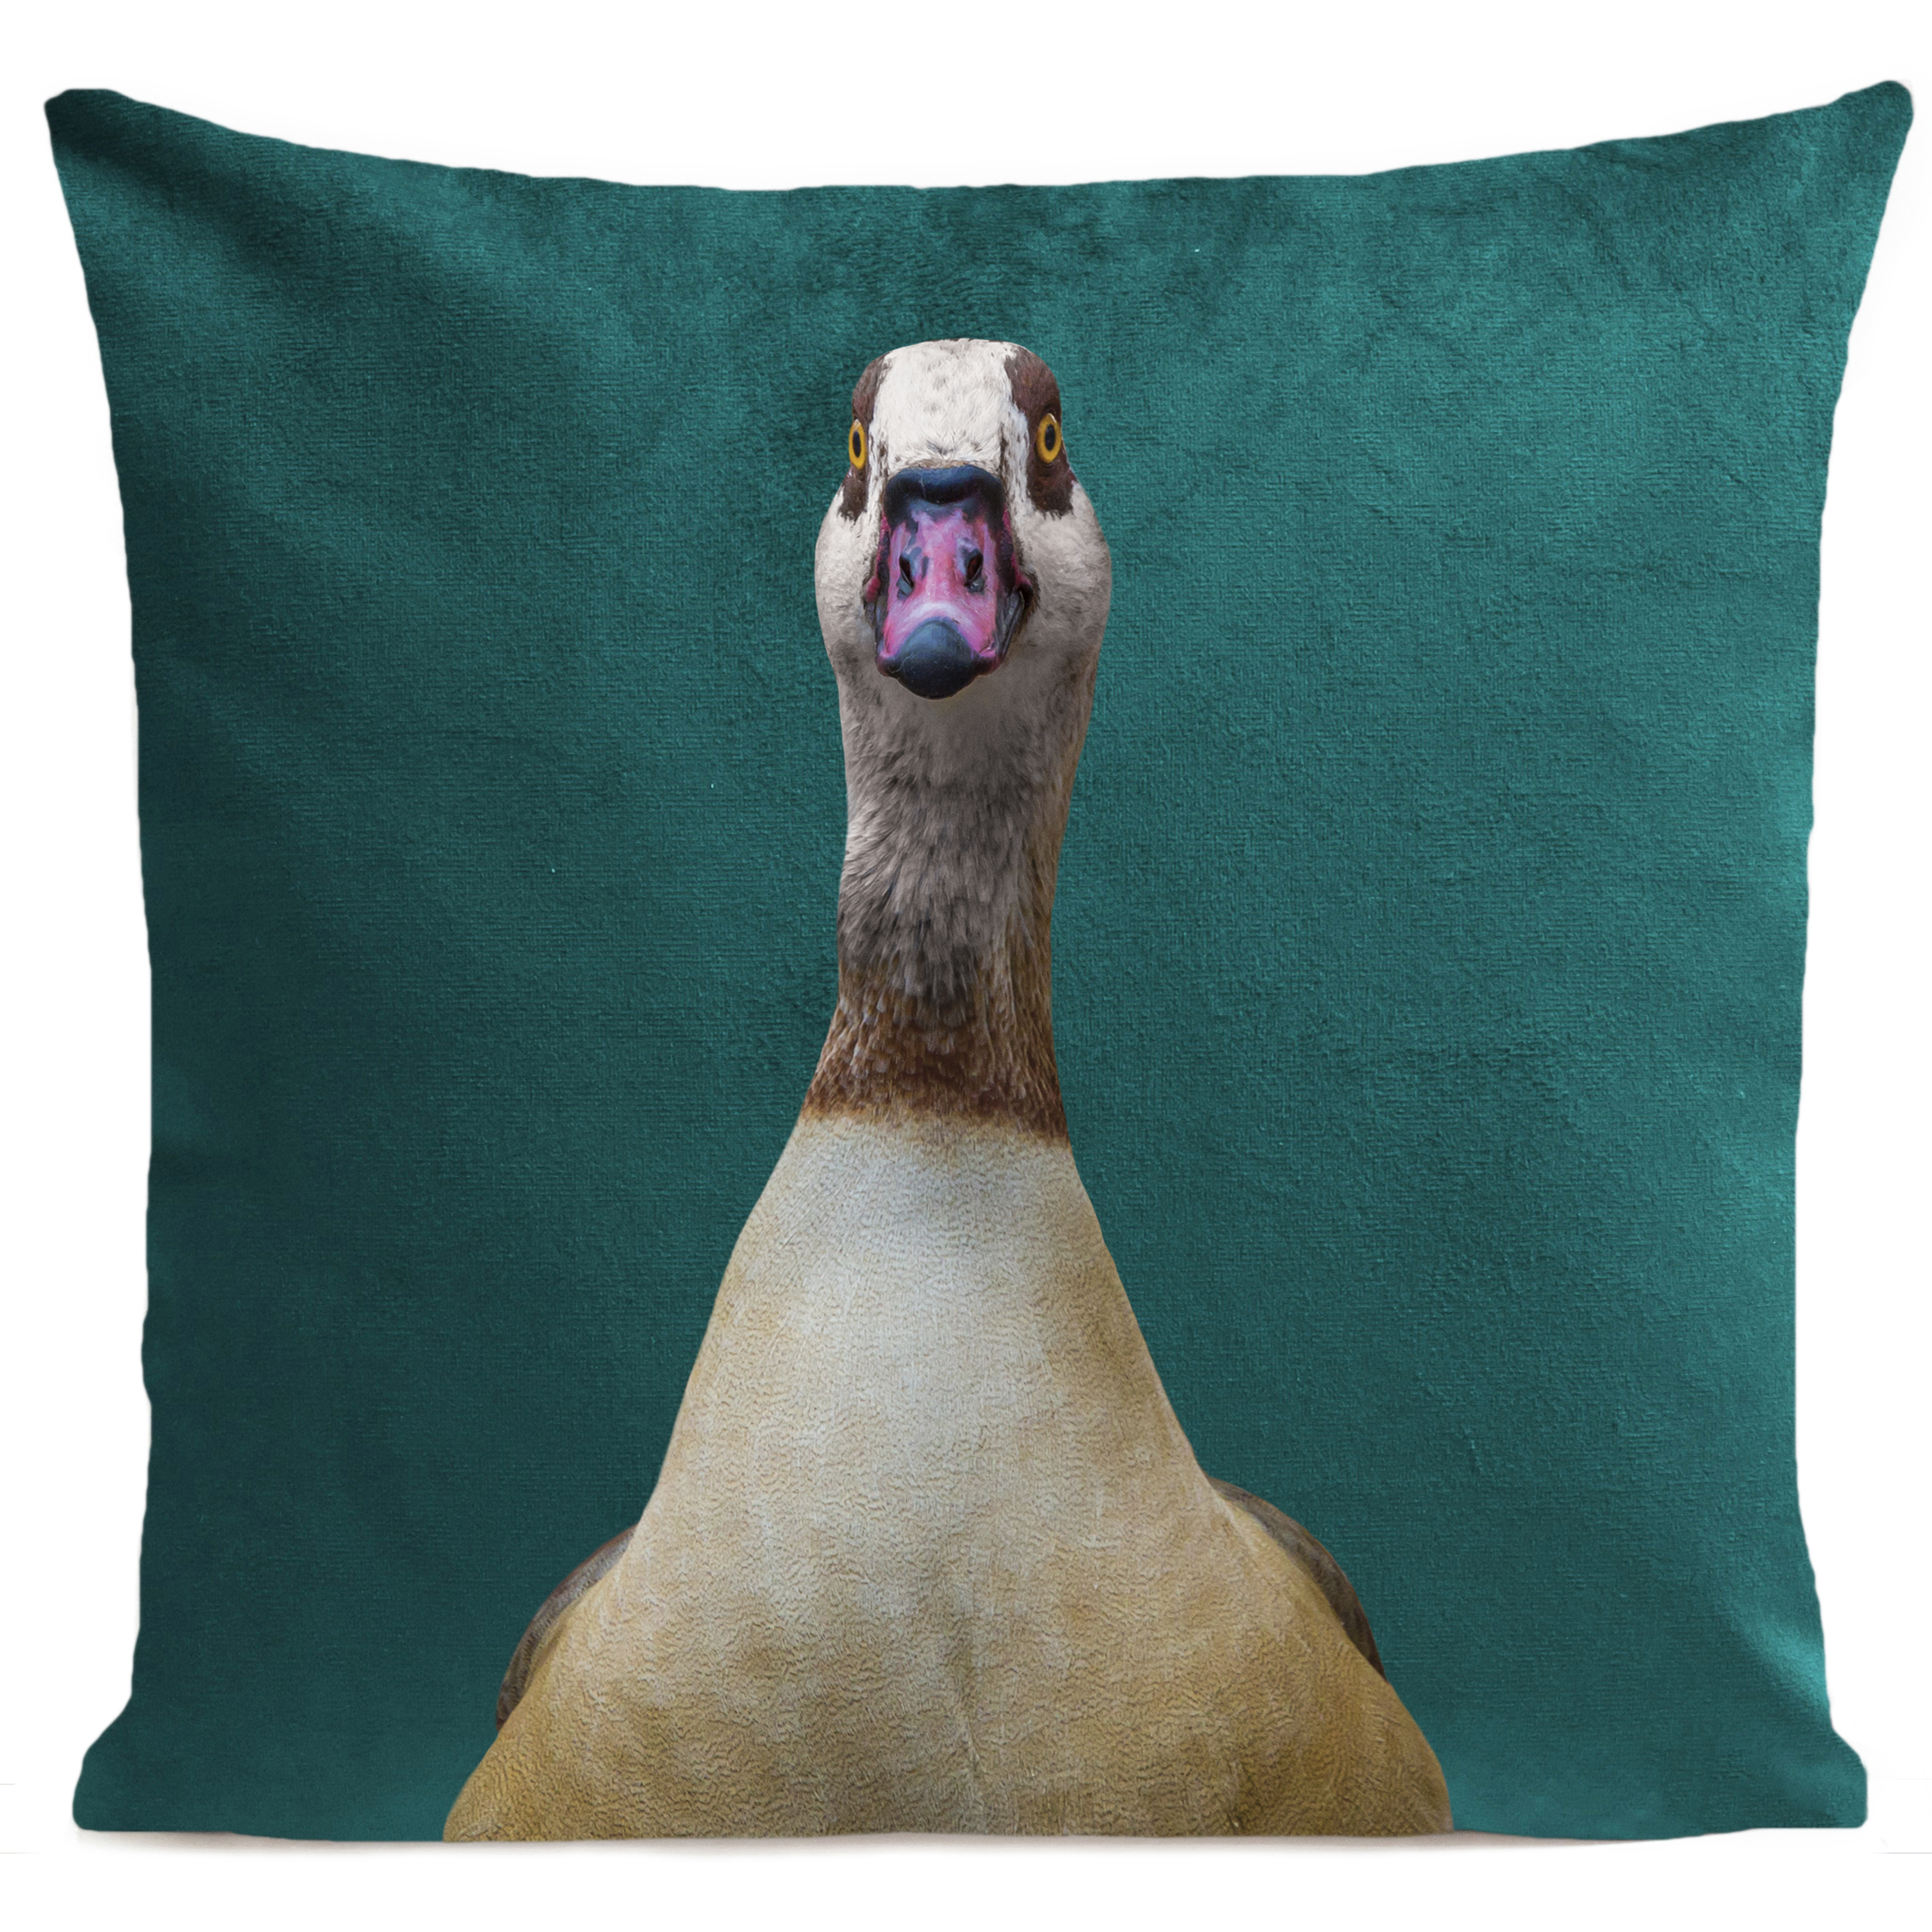 coussin-funny-goose-vert-paon